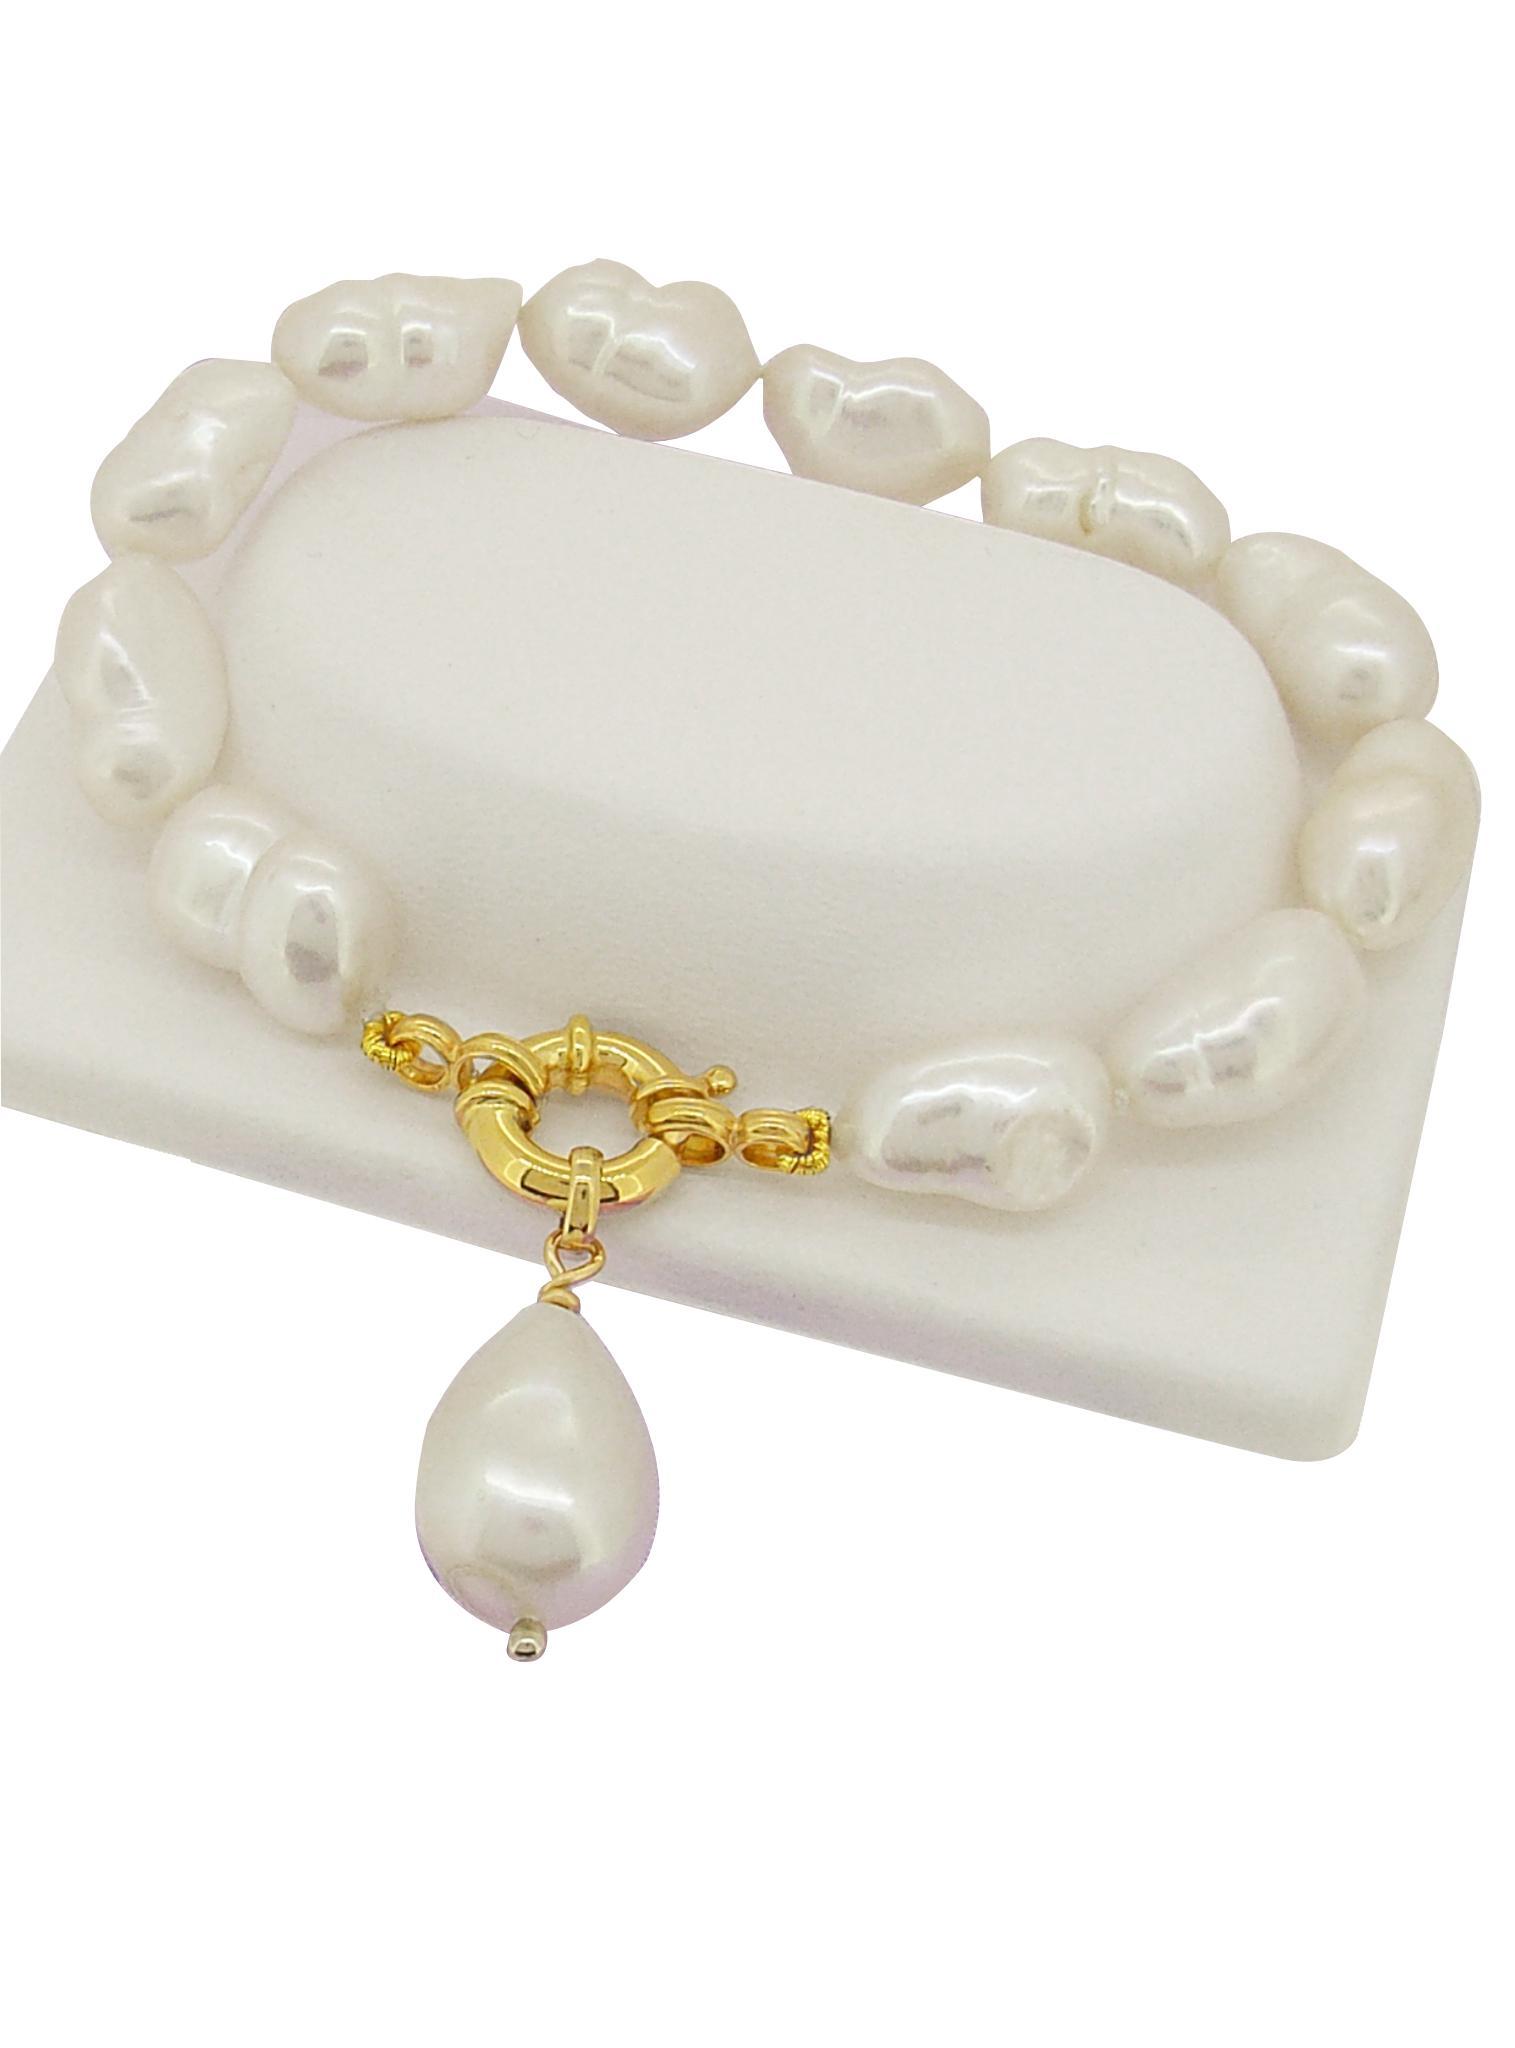 Buy Big Pearl Bracelet With Freshwater Pearls Natural Pearl Online in India   Etsy